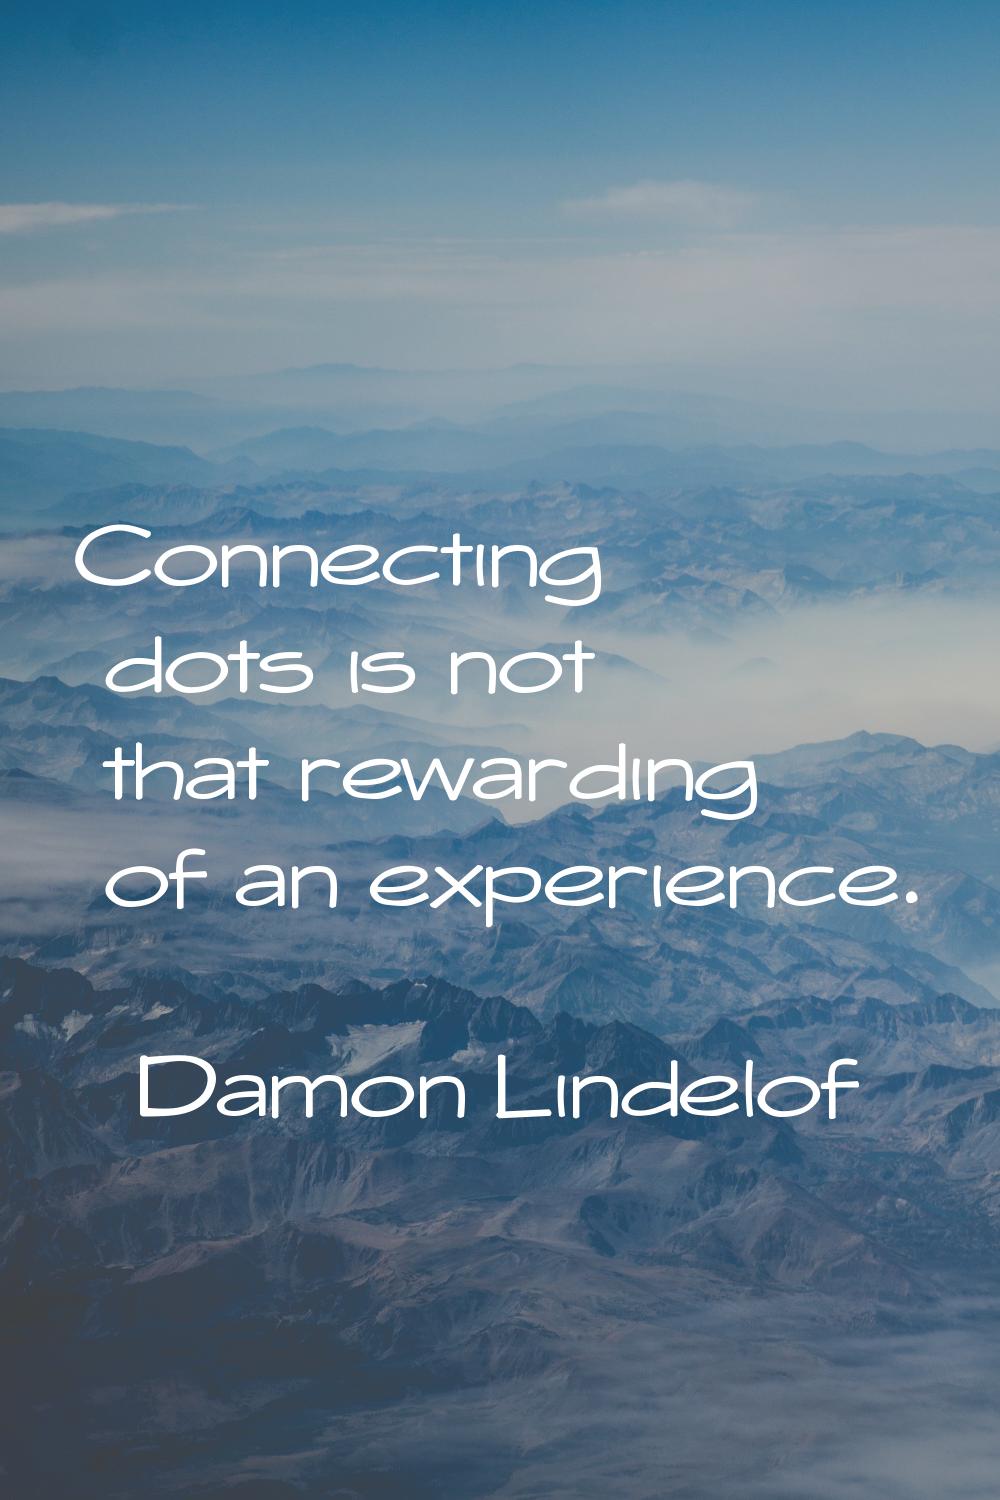 Connecting dots is not that rewarding of an experience.